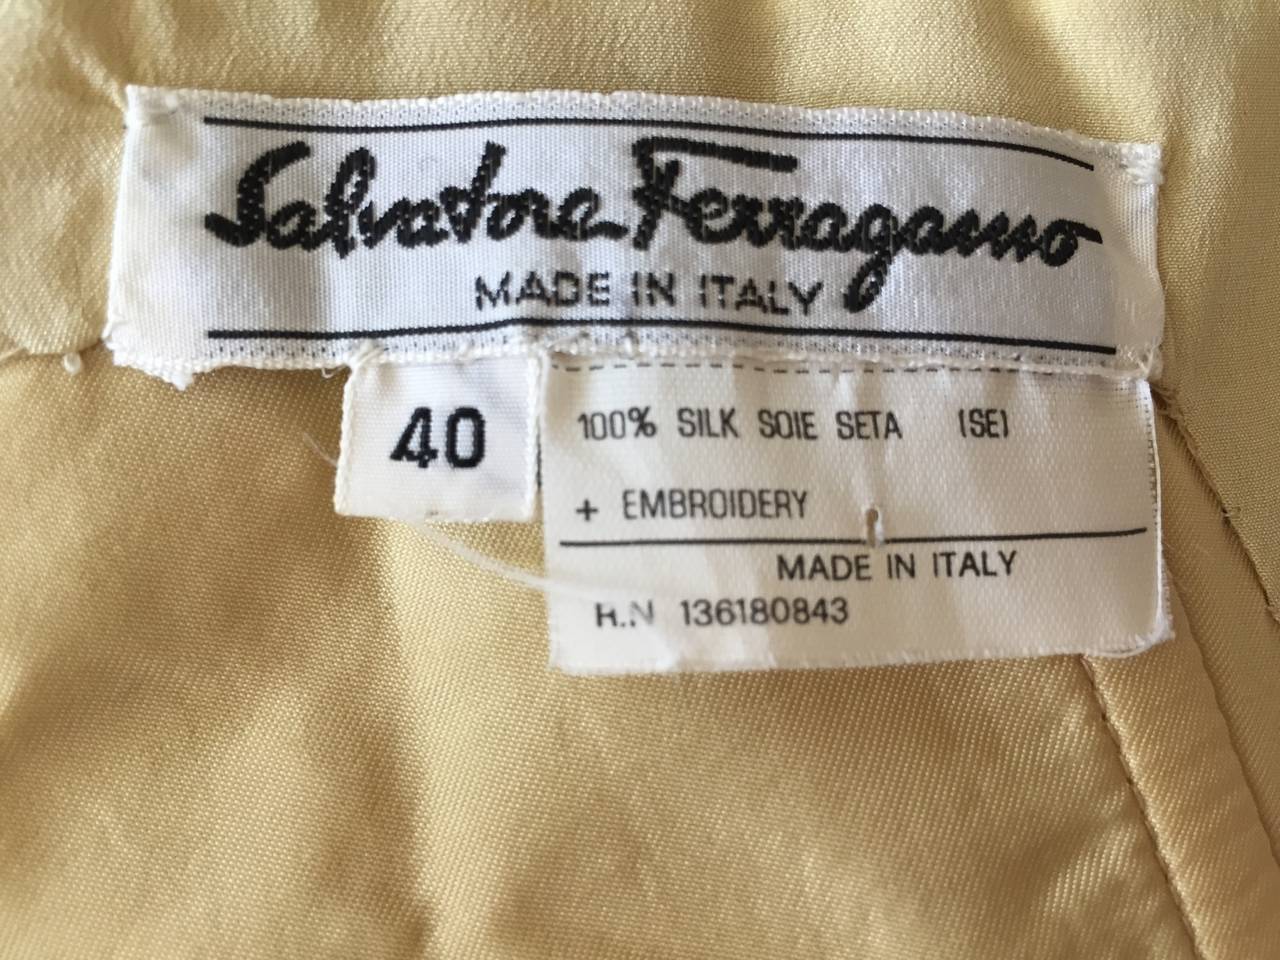 Ferragamo Vintage Gold Sequin Top w Corset Lace Back In Excellent Condition For Sale In Cloverdale, CA